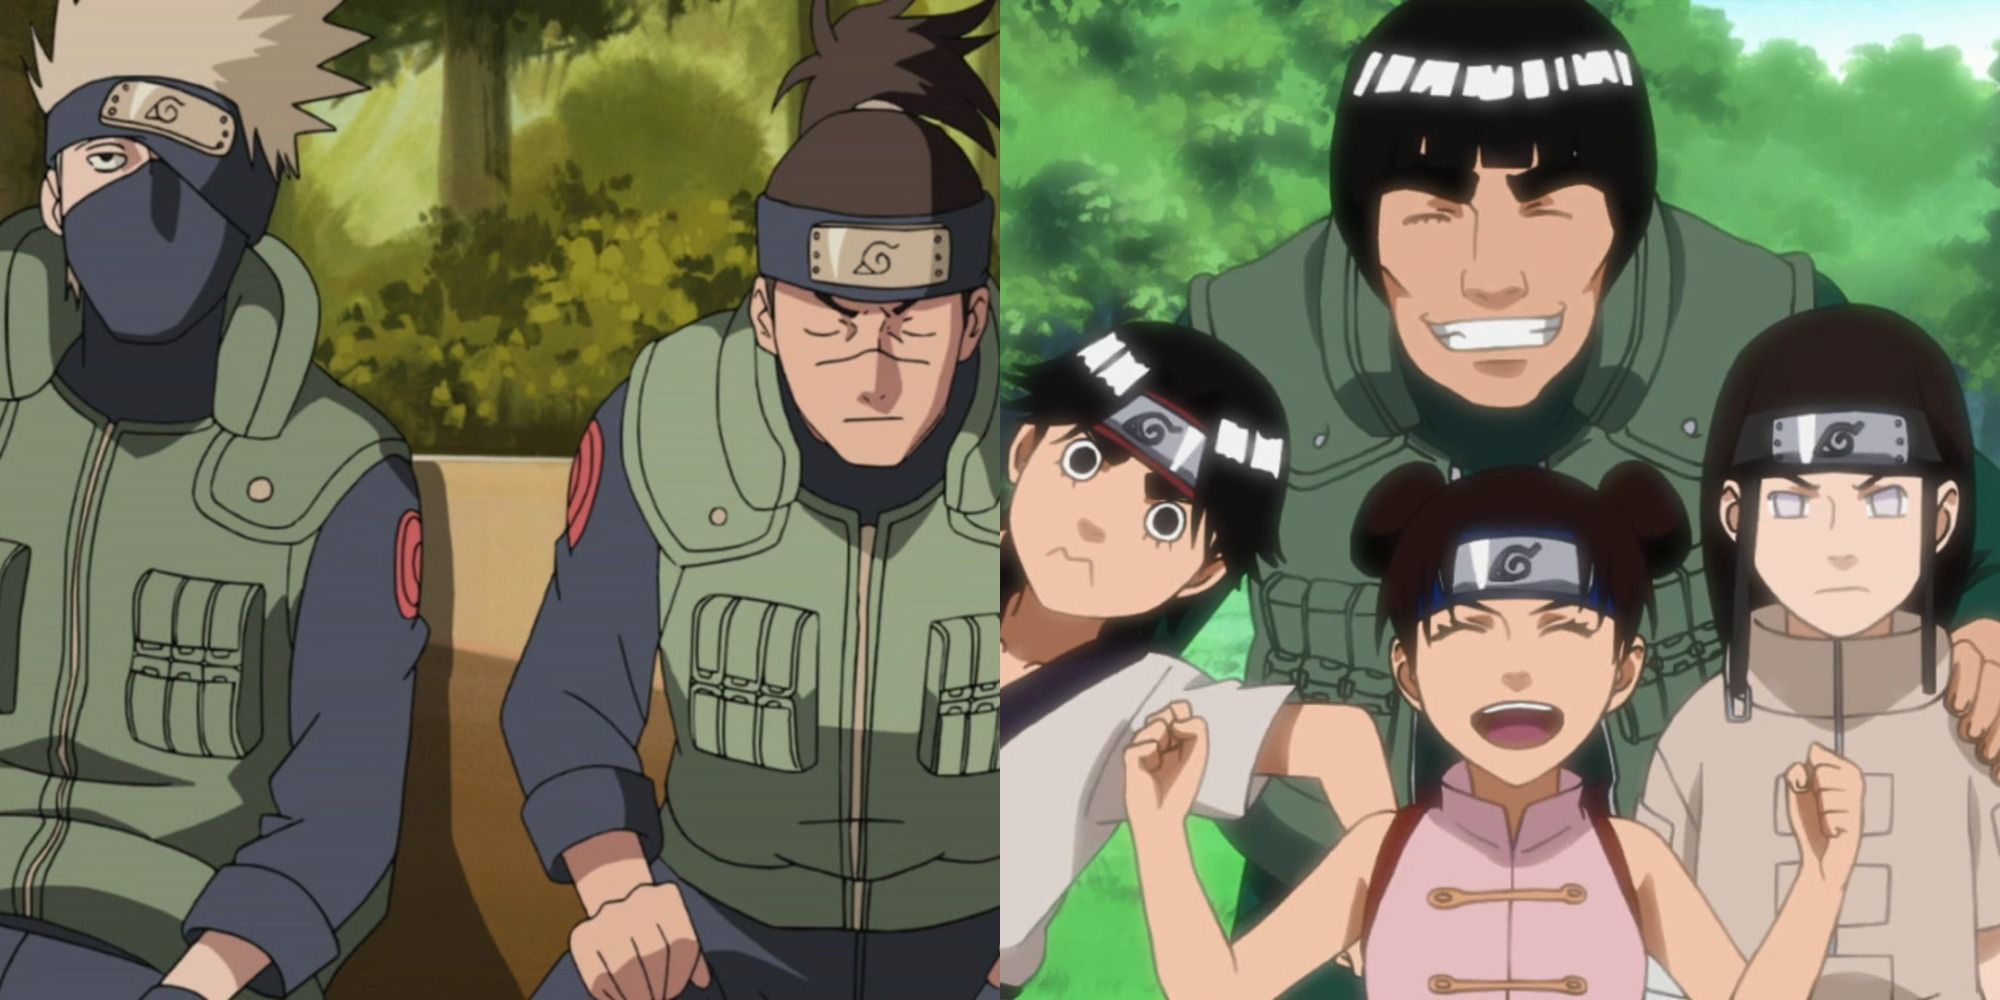 Naruto: 10 Longest Arcs In The Anime Series, Ranked By Total Episodes